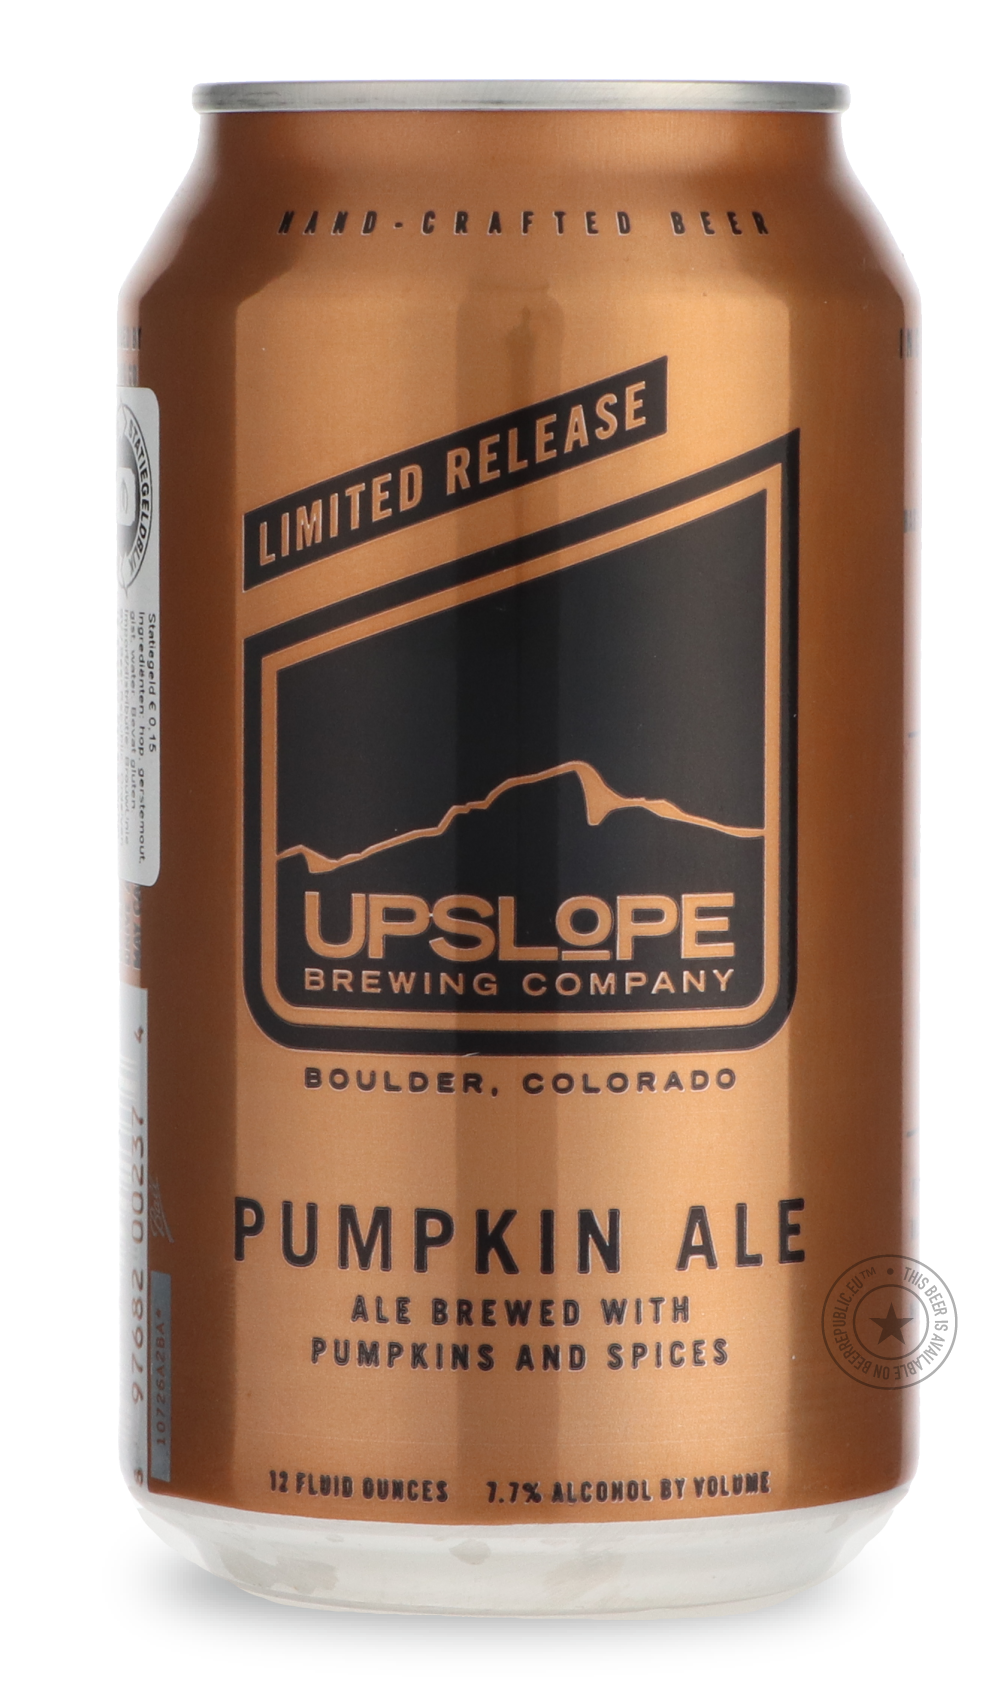 -Upslope- Pumpkin-Specials- Only @ Beer Republic - The best online beer store for American & Canadian craft beer - Buy beer online from the USA and Canada - Bier online kopen - Amerikaans bier kopen - Craft beer store - Craft beer kopen - Amerikanisch bier kaufen - Bier online kaufen - Acheter biere online - IPA - Stout - Porter - New England IPA - Hazy IPA - Imperial Stout - Barrel Aged - Barrel Aged Imperial Stout - Brown - Dark beer - Blond - Blonde - Pilsner - Lager - Wheat - Weizen - Amber - Barley Win